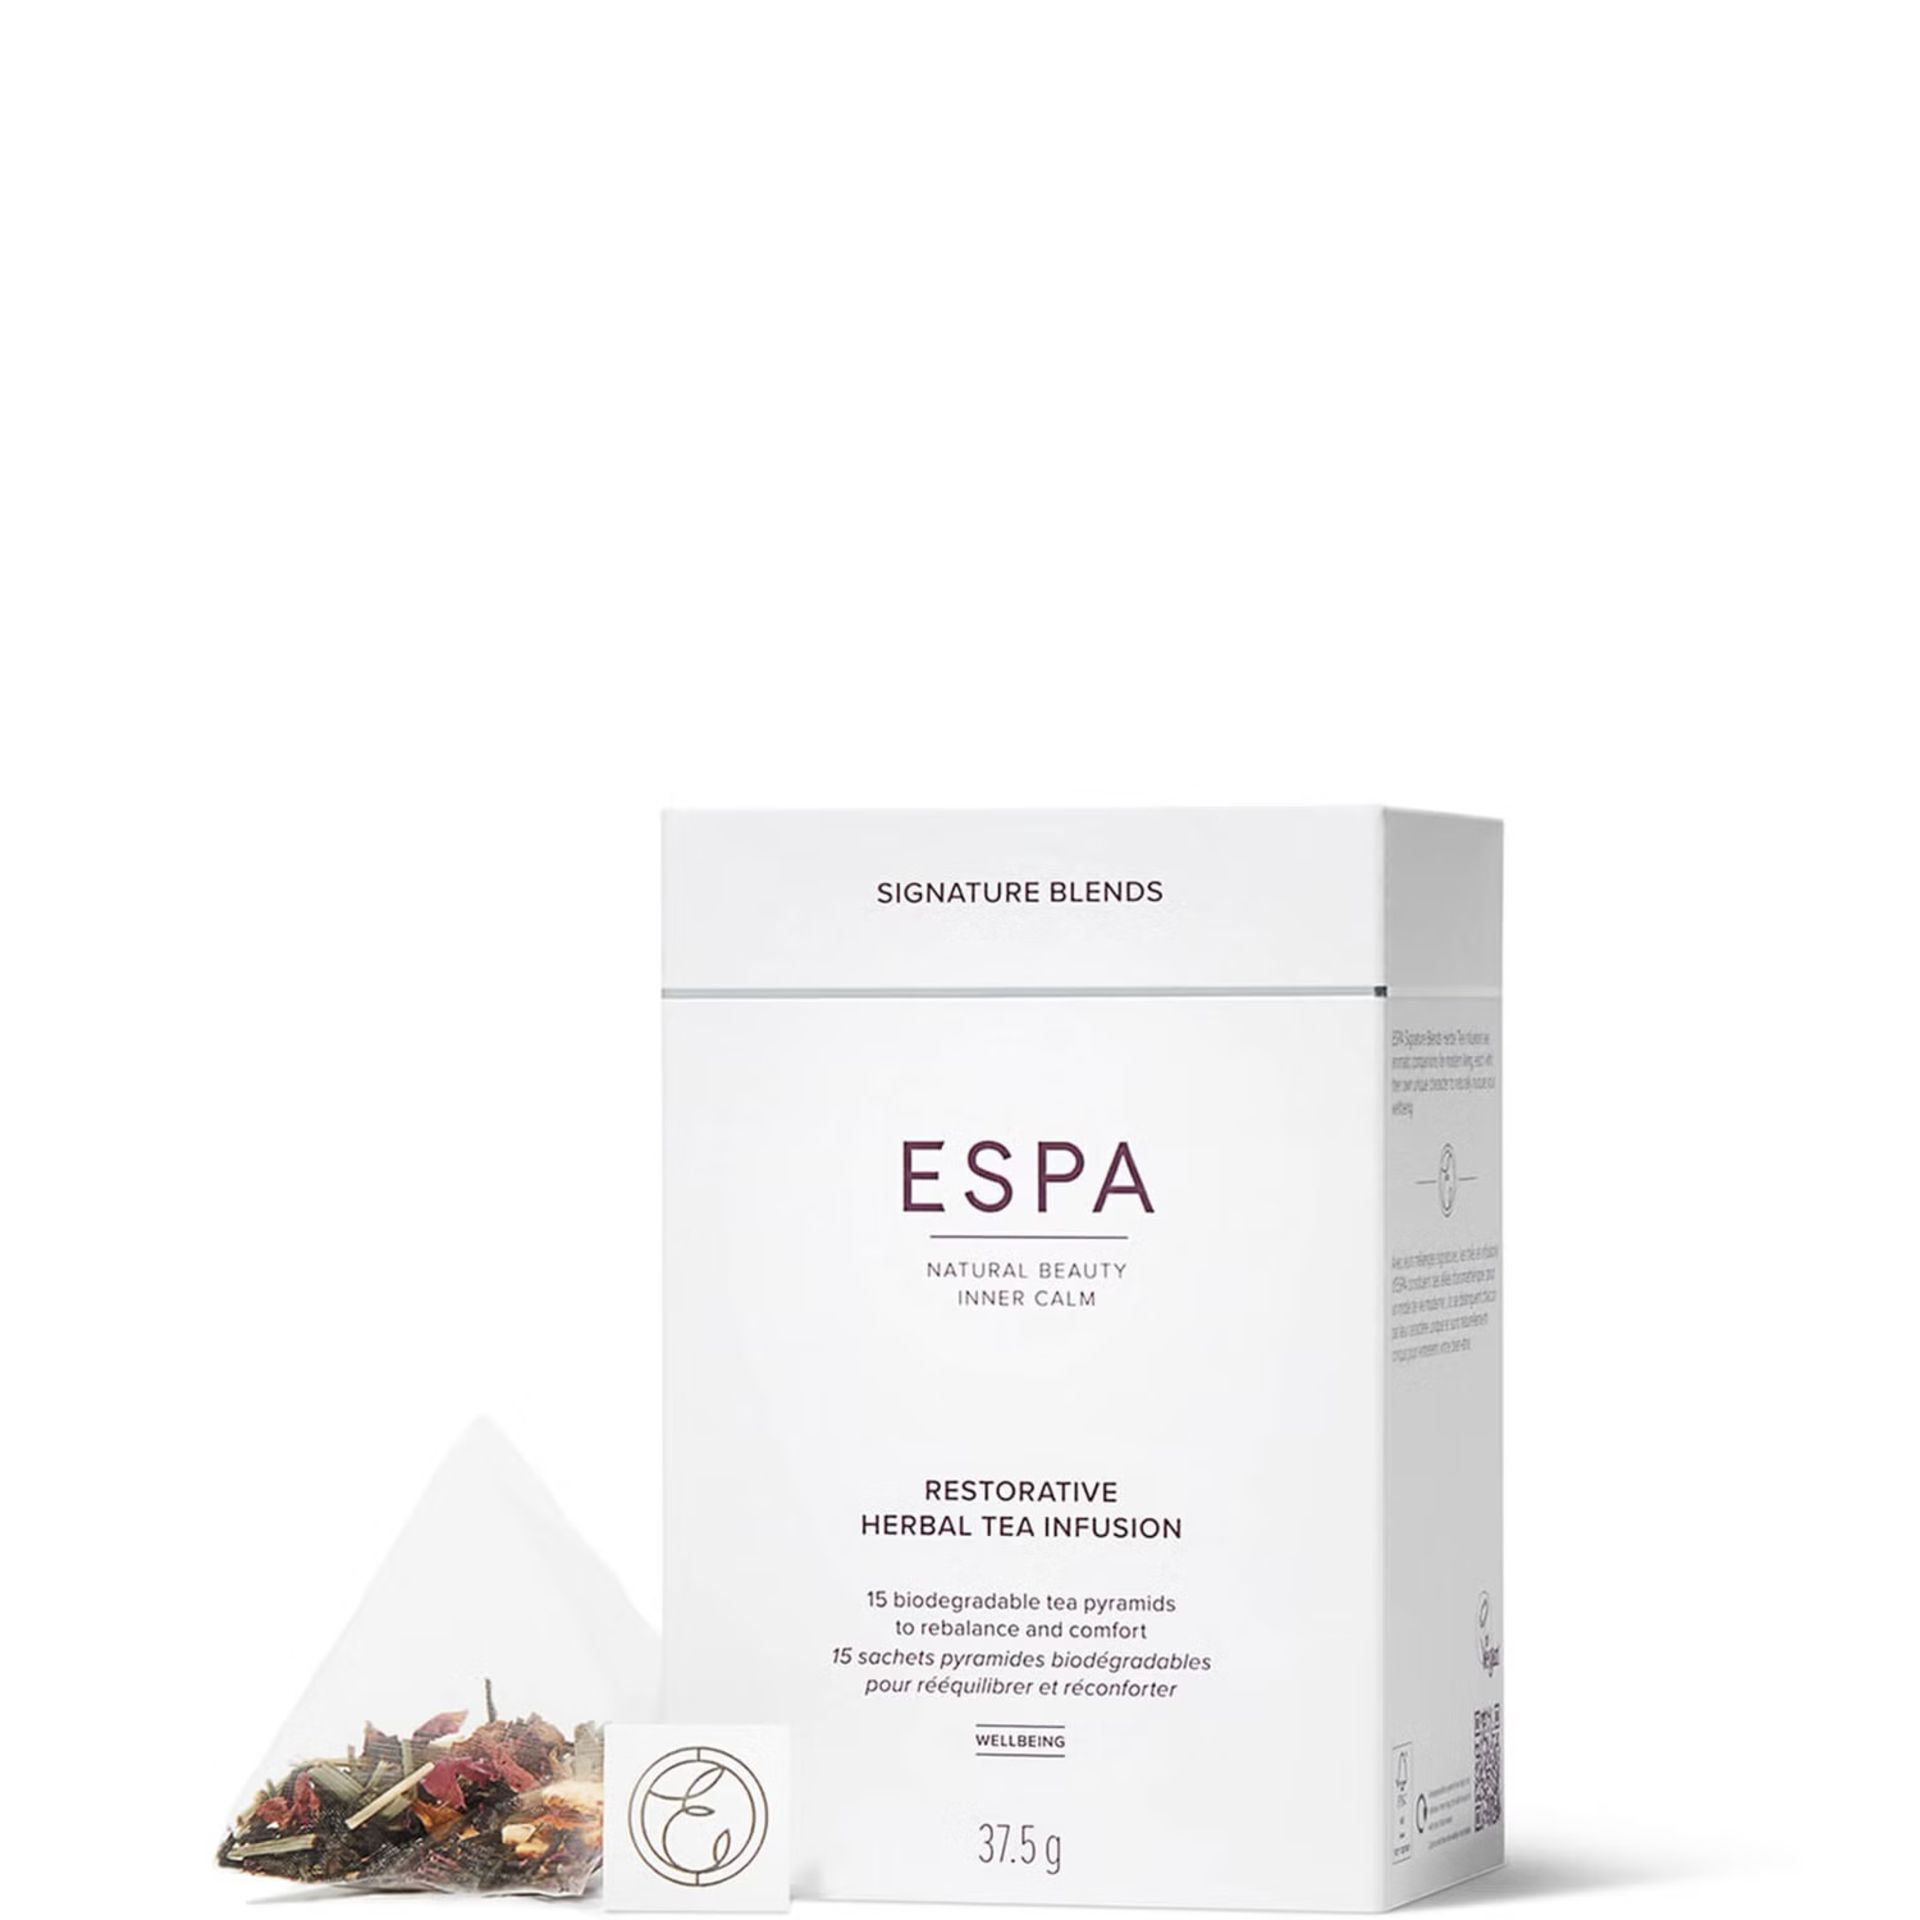 20x NEW & BOXED ESPA Restorative Herbal Tea Infusion 37.5g. RRP £15 EACH. (EBR4). The delicate aroma